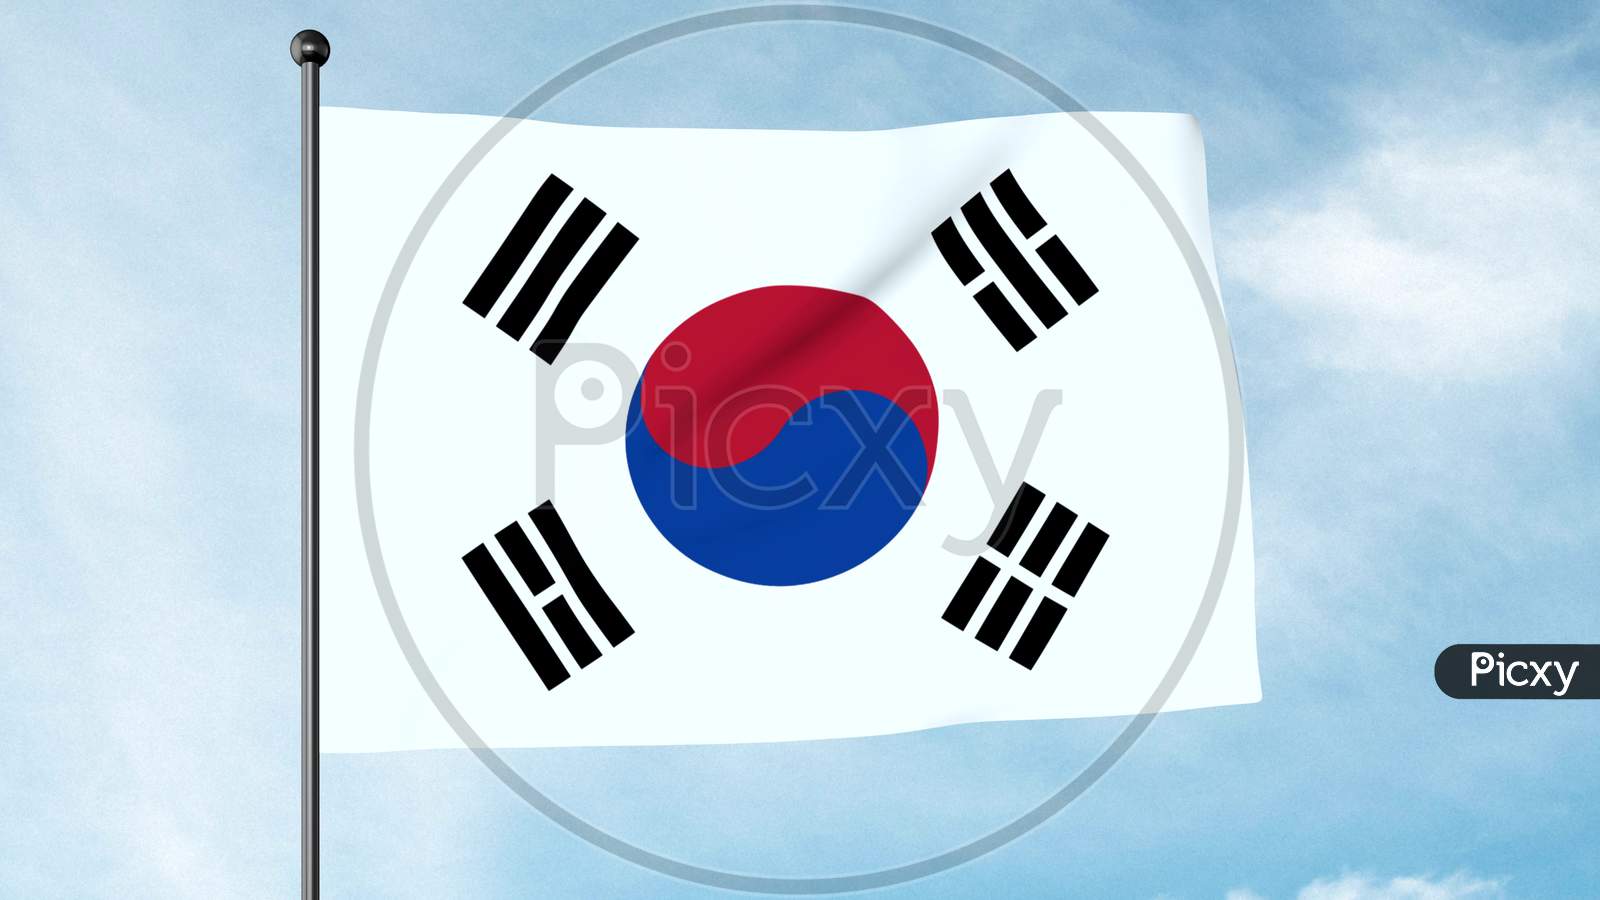 3D Illustration Of The Flag Of South Korea, The Taegukgi, Has Three Parts: A White Rectangular Background, A Red And Blue Taegeuk In Its Centre, And Four Black Trigrams, One In Each Corner.